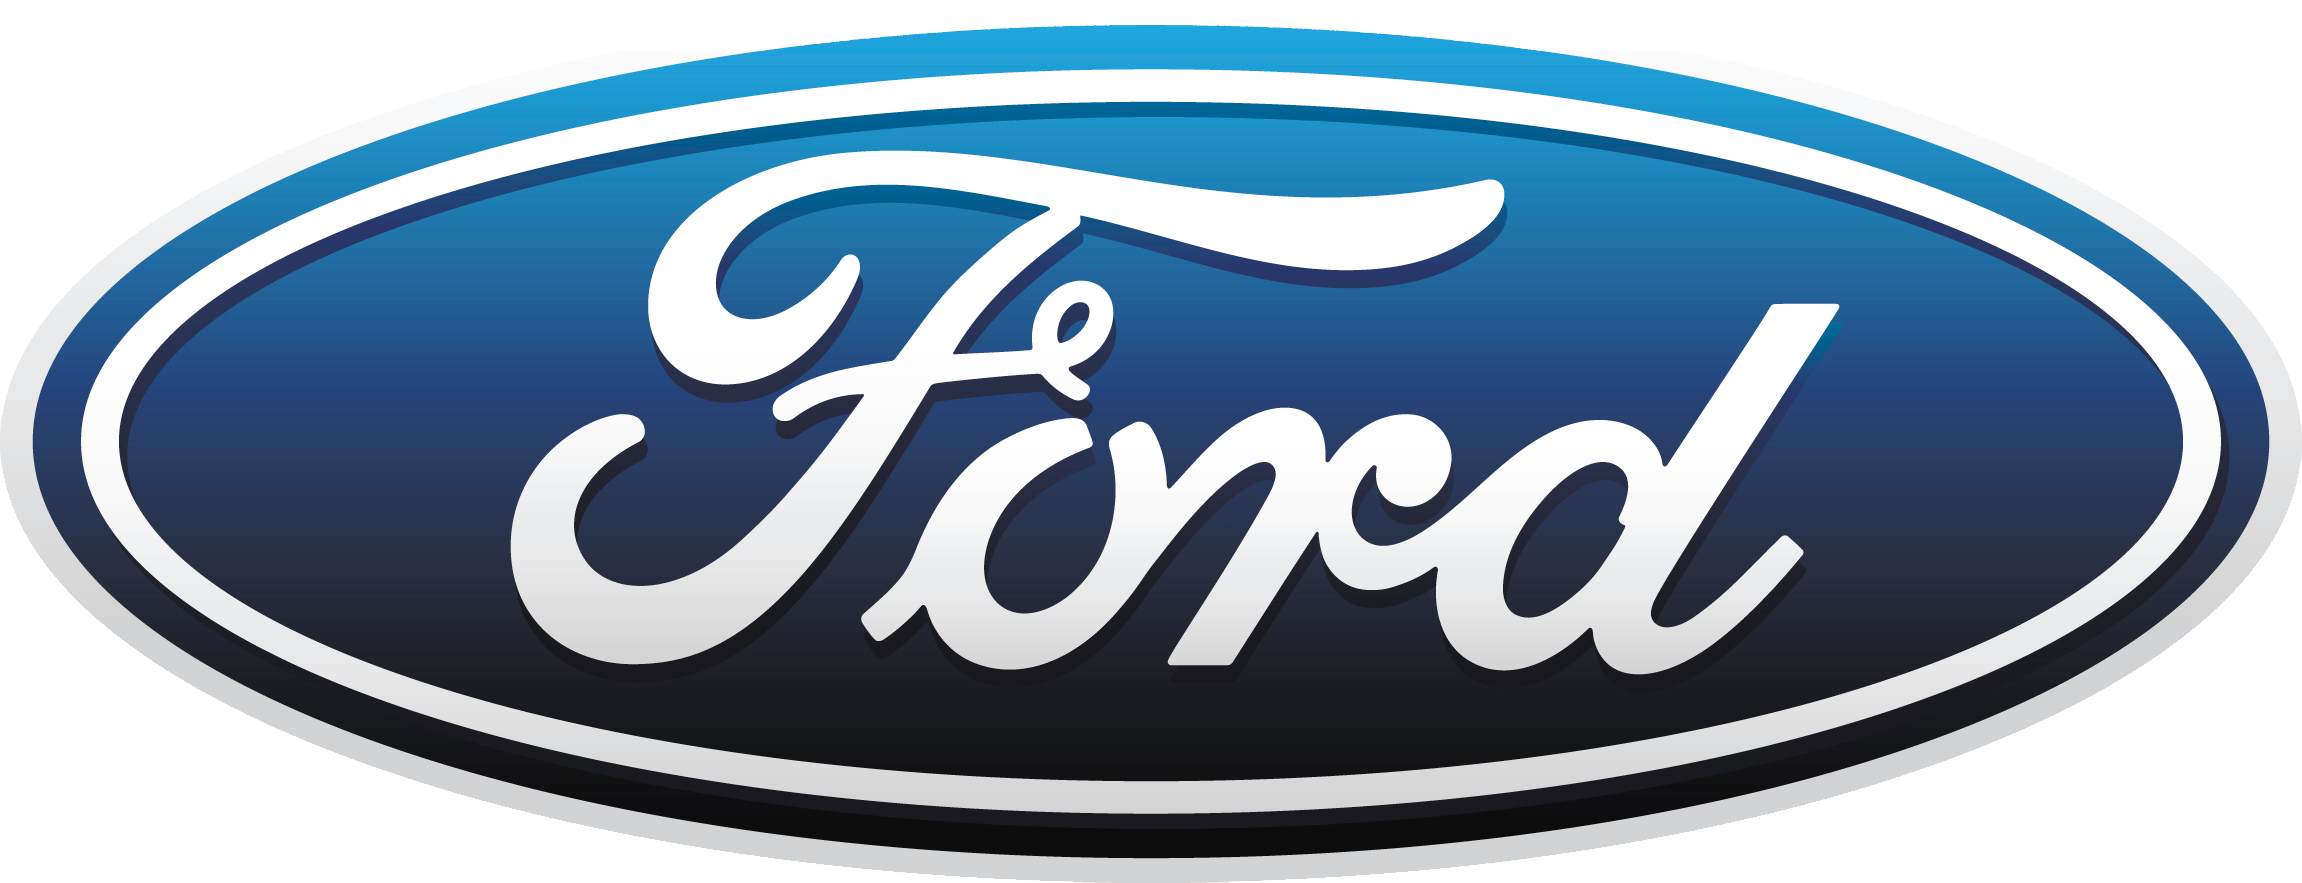 Ford cliparts